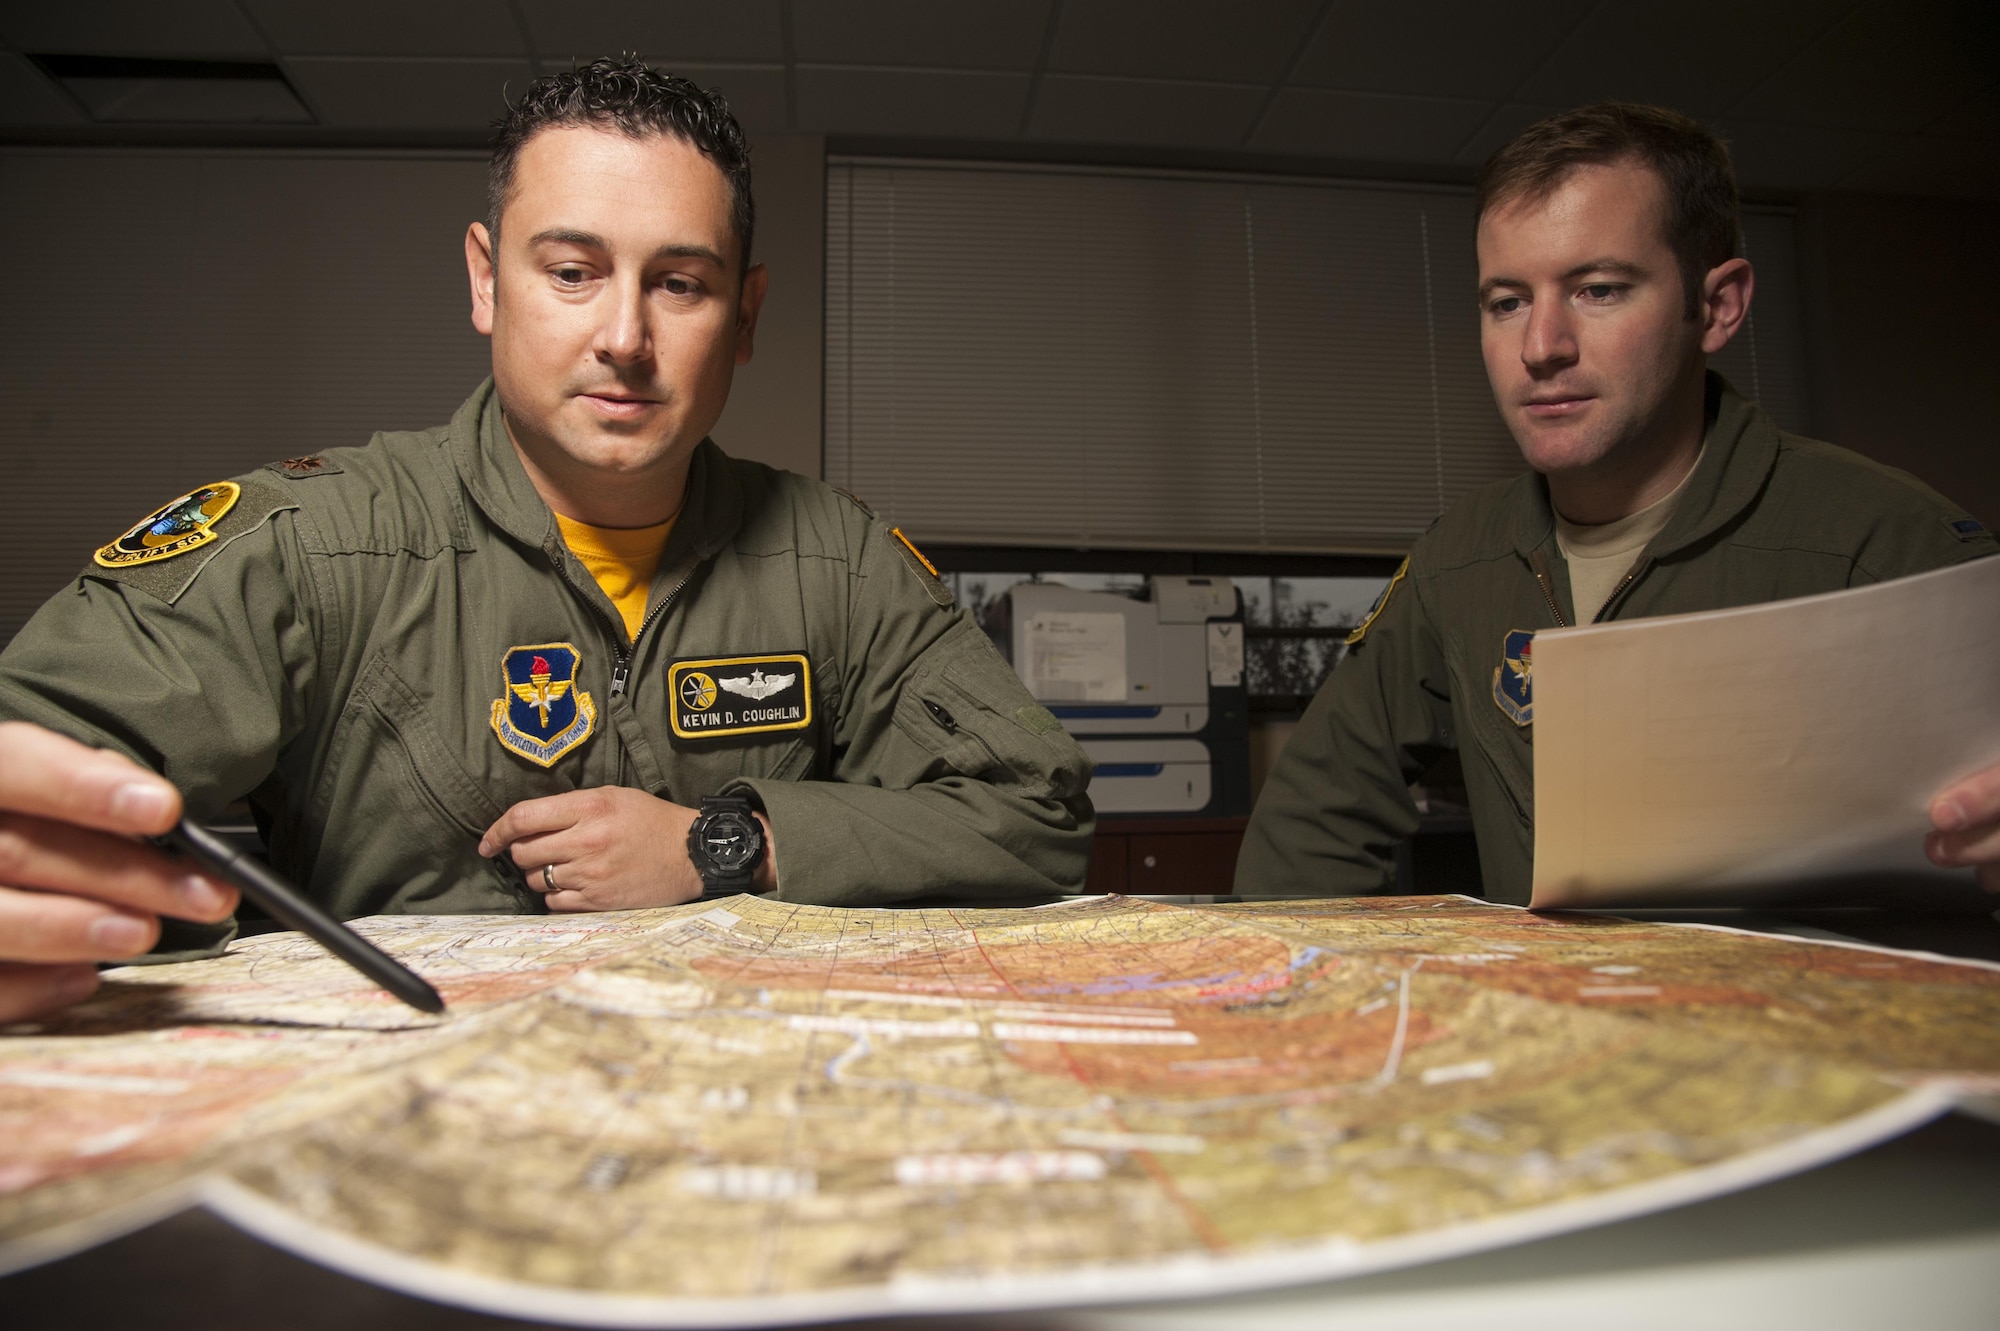 Maj. Kevin Coughlin reviews flight plans before a flight Nov. 20, 2014, at Little Rock Air Force Base, Ark. Coughlin spent time training Israeli aircrews on the Coordinated Aircraft Positioning (CAP) system and Station Keeping Equipment (SKE) formation operation systems. Coughlin is the 48th Airlift Squadron flight commander and an instructor pilot. (U.S. Air Force photo/Senior Airman Kaylee Clark) 